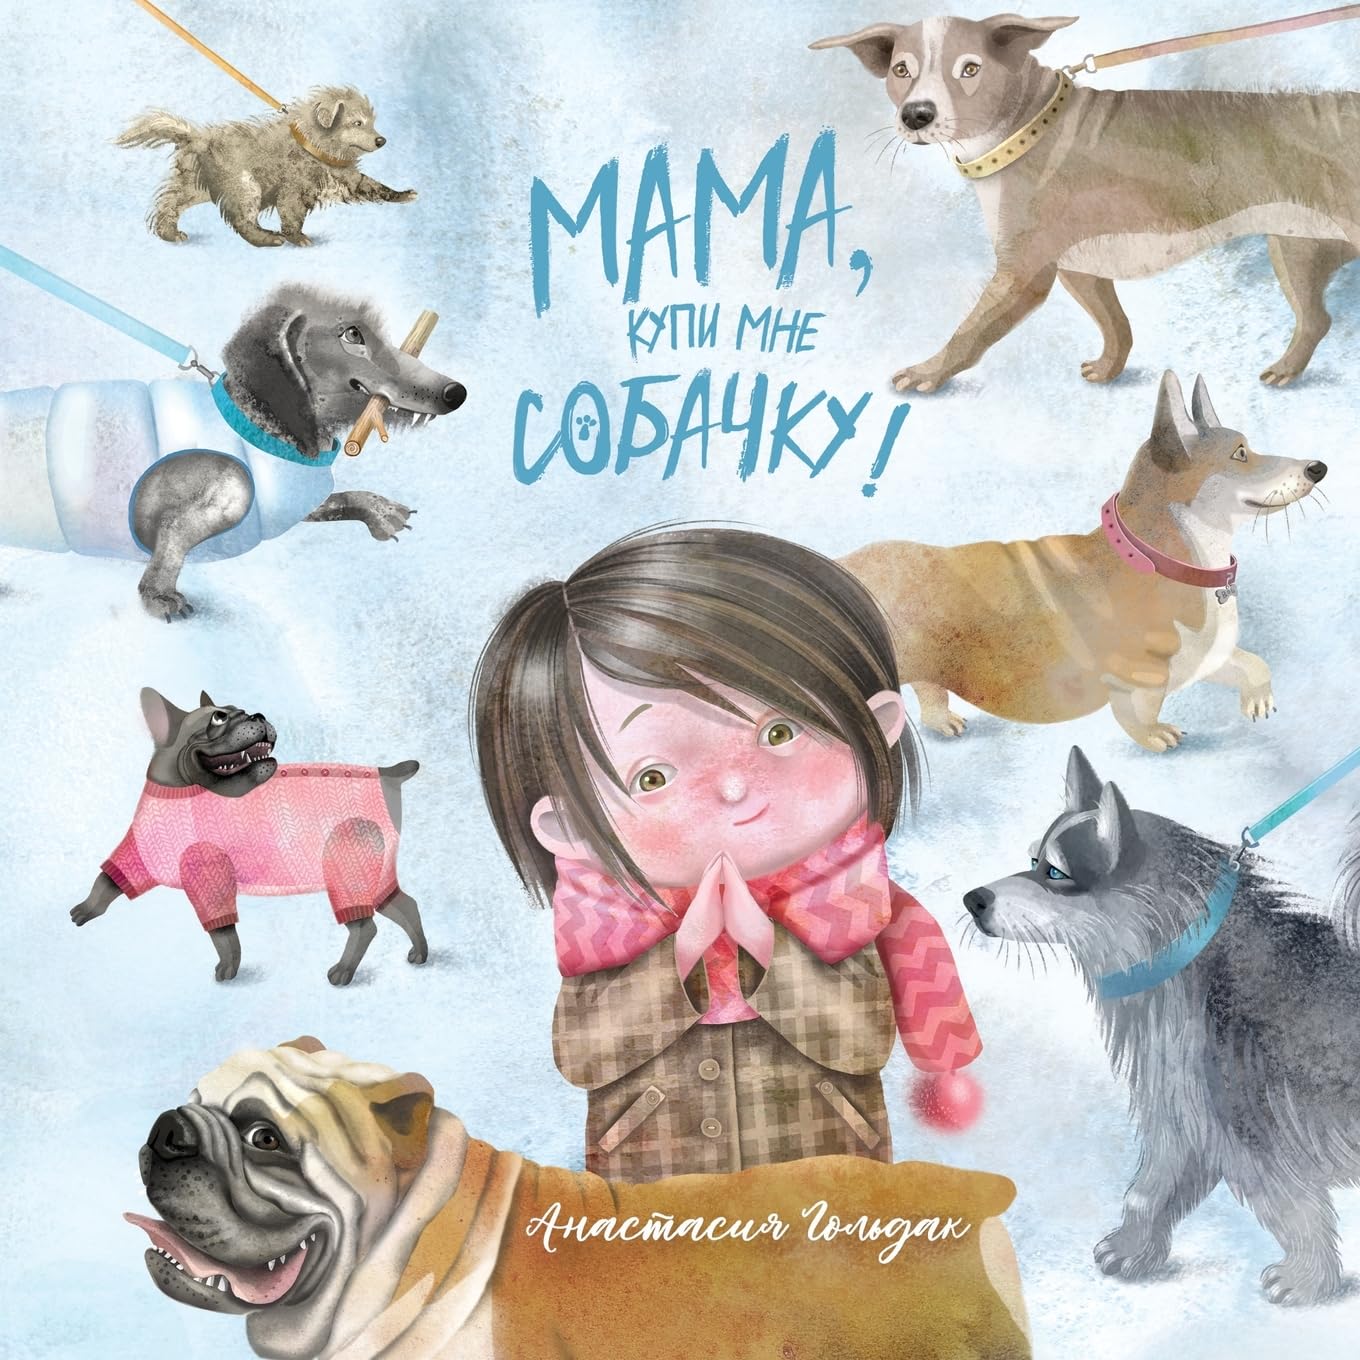 Mom, Can We Get a Dog?: Russian Version (Russian Edition)